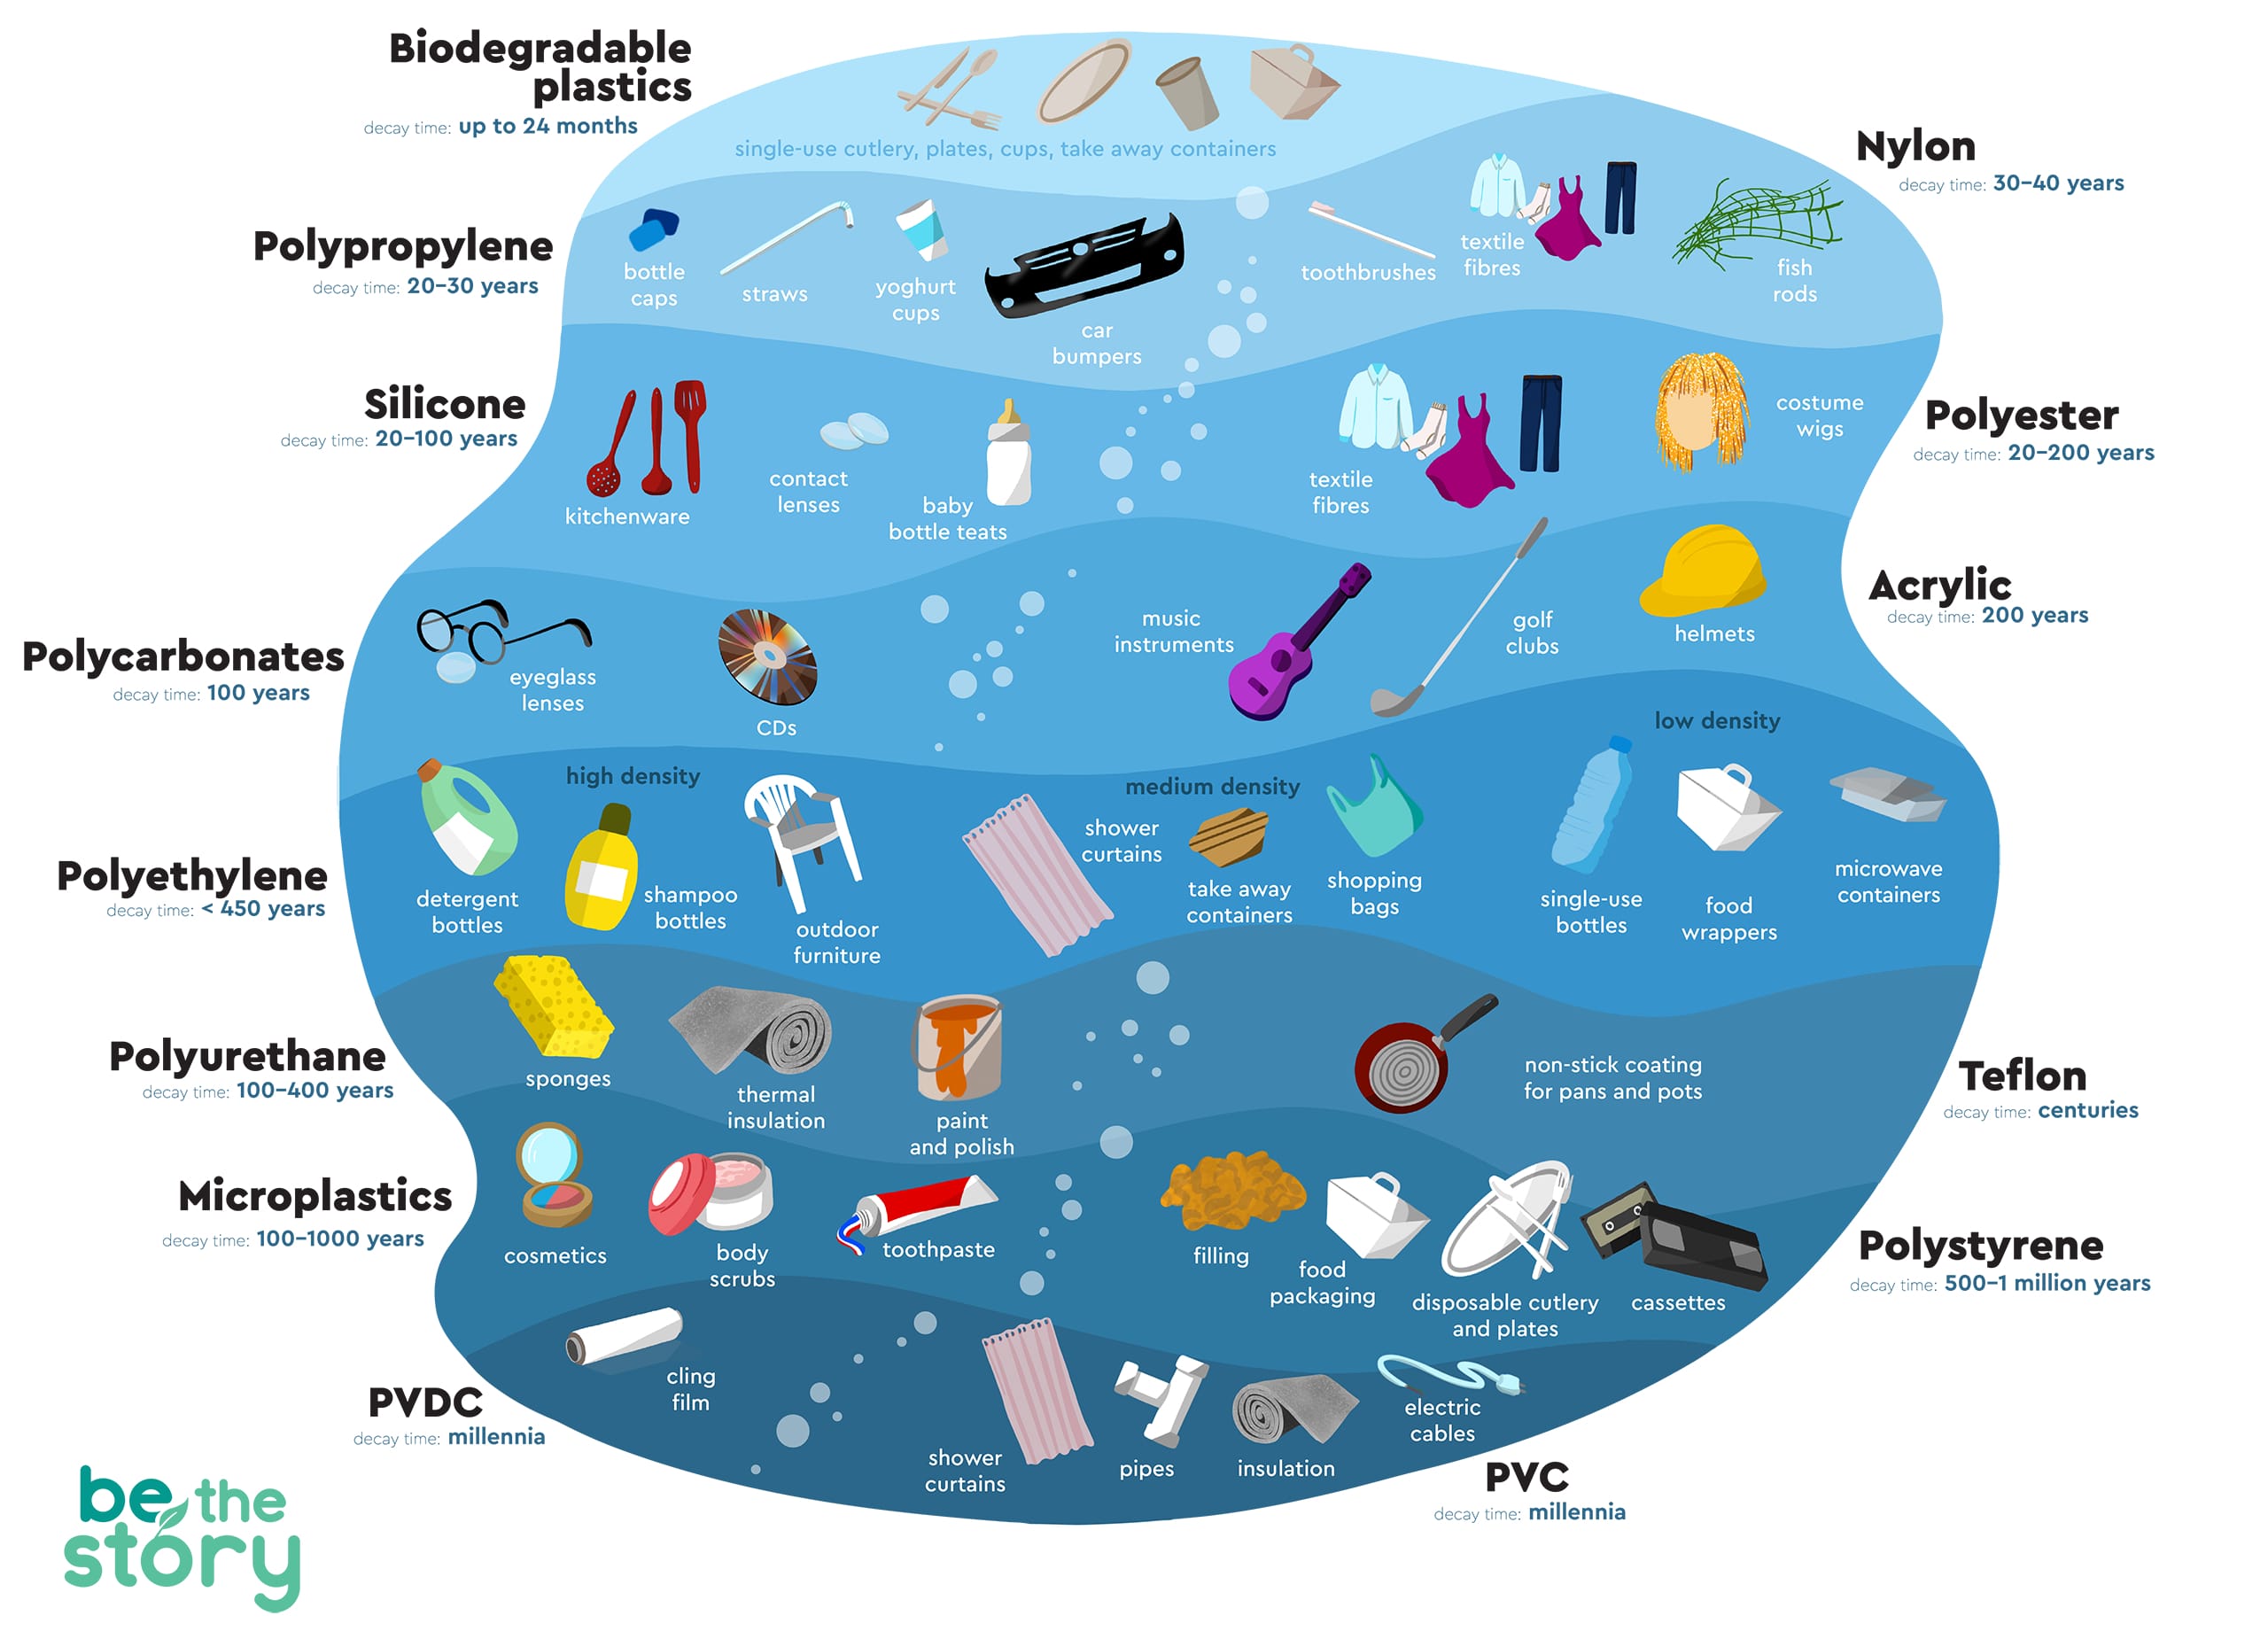 Types of plastic that end up in the ocean and their decay time.